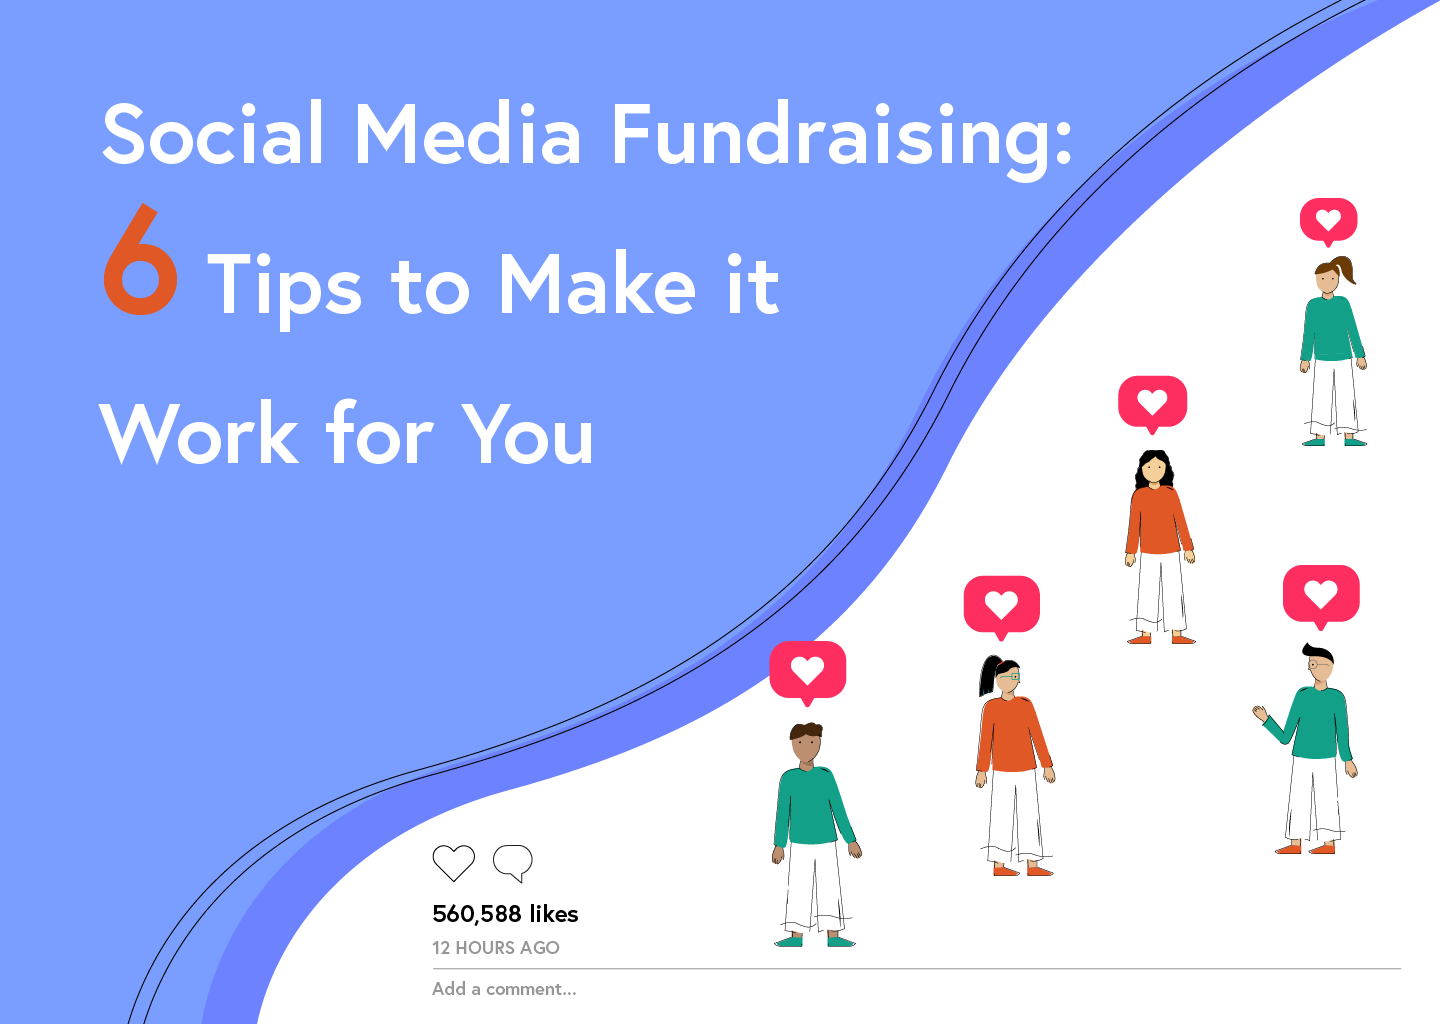 Social Media Fundraising: 6 Tips to Make It Work for You